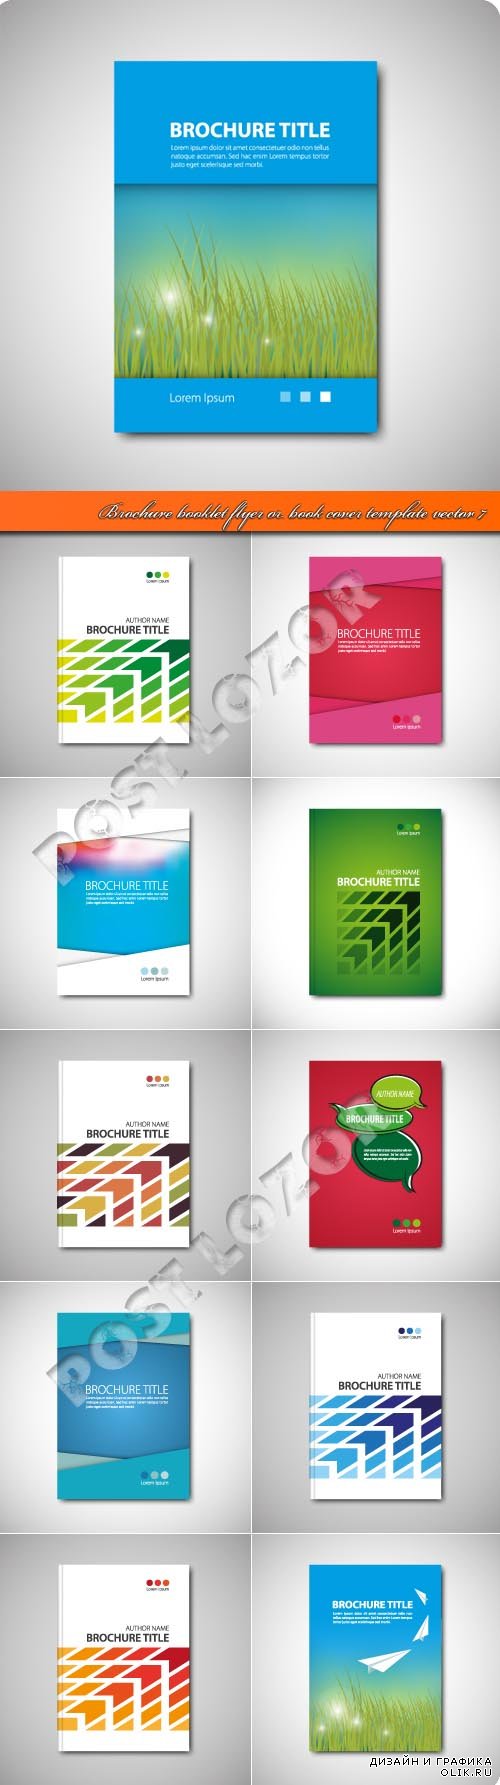 Brochure booklet flyer or book cover template vector 7